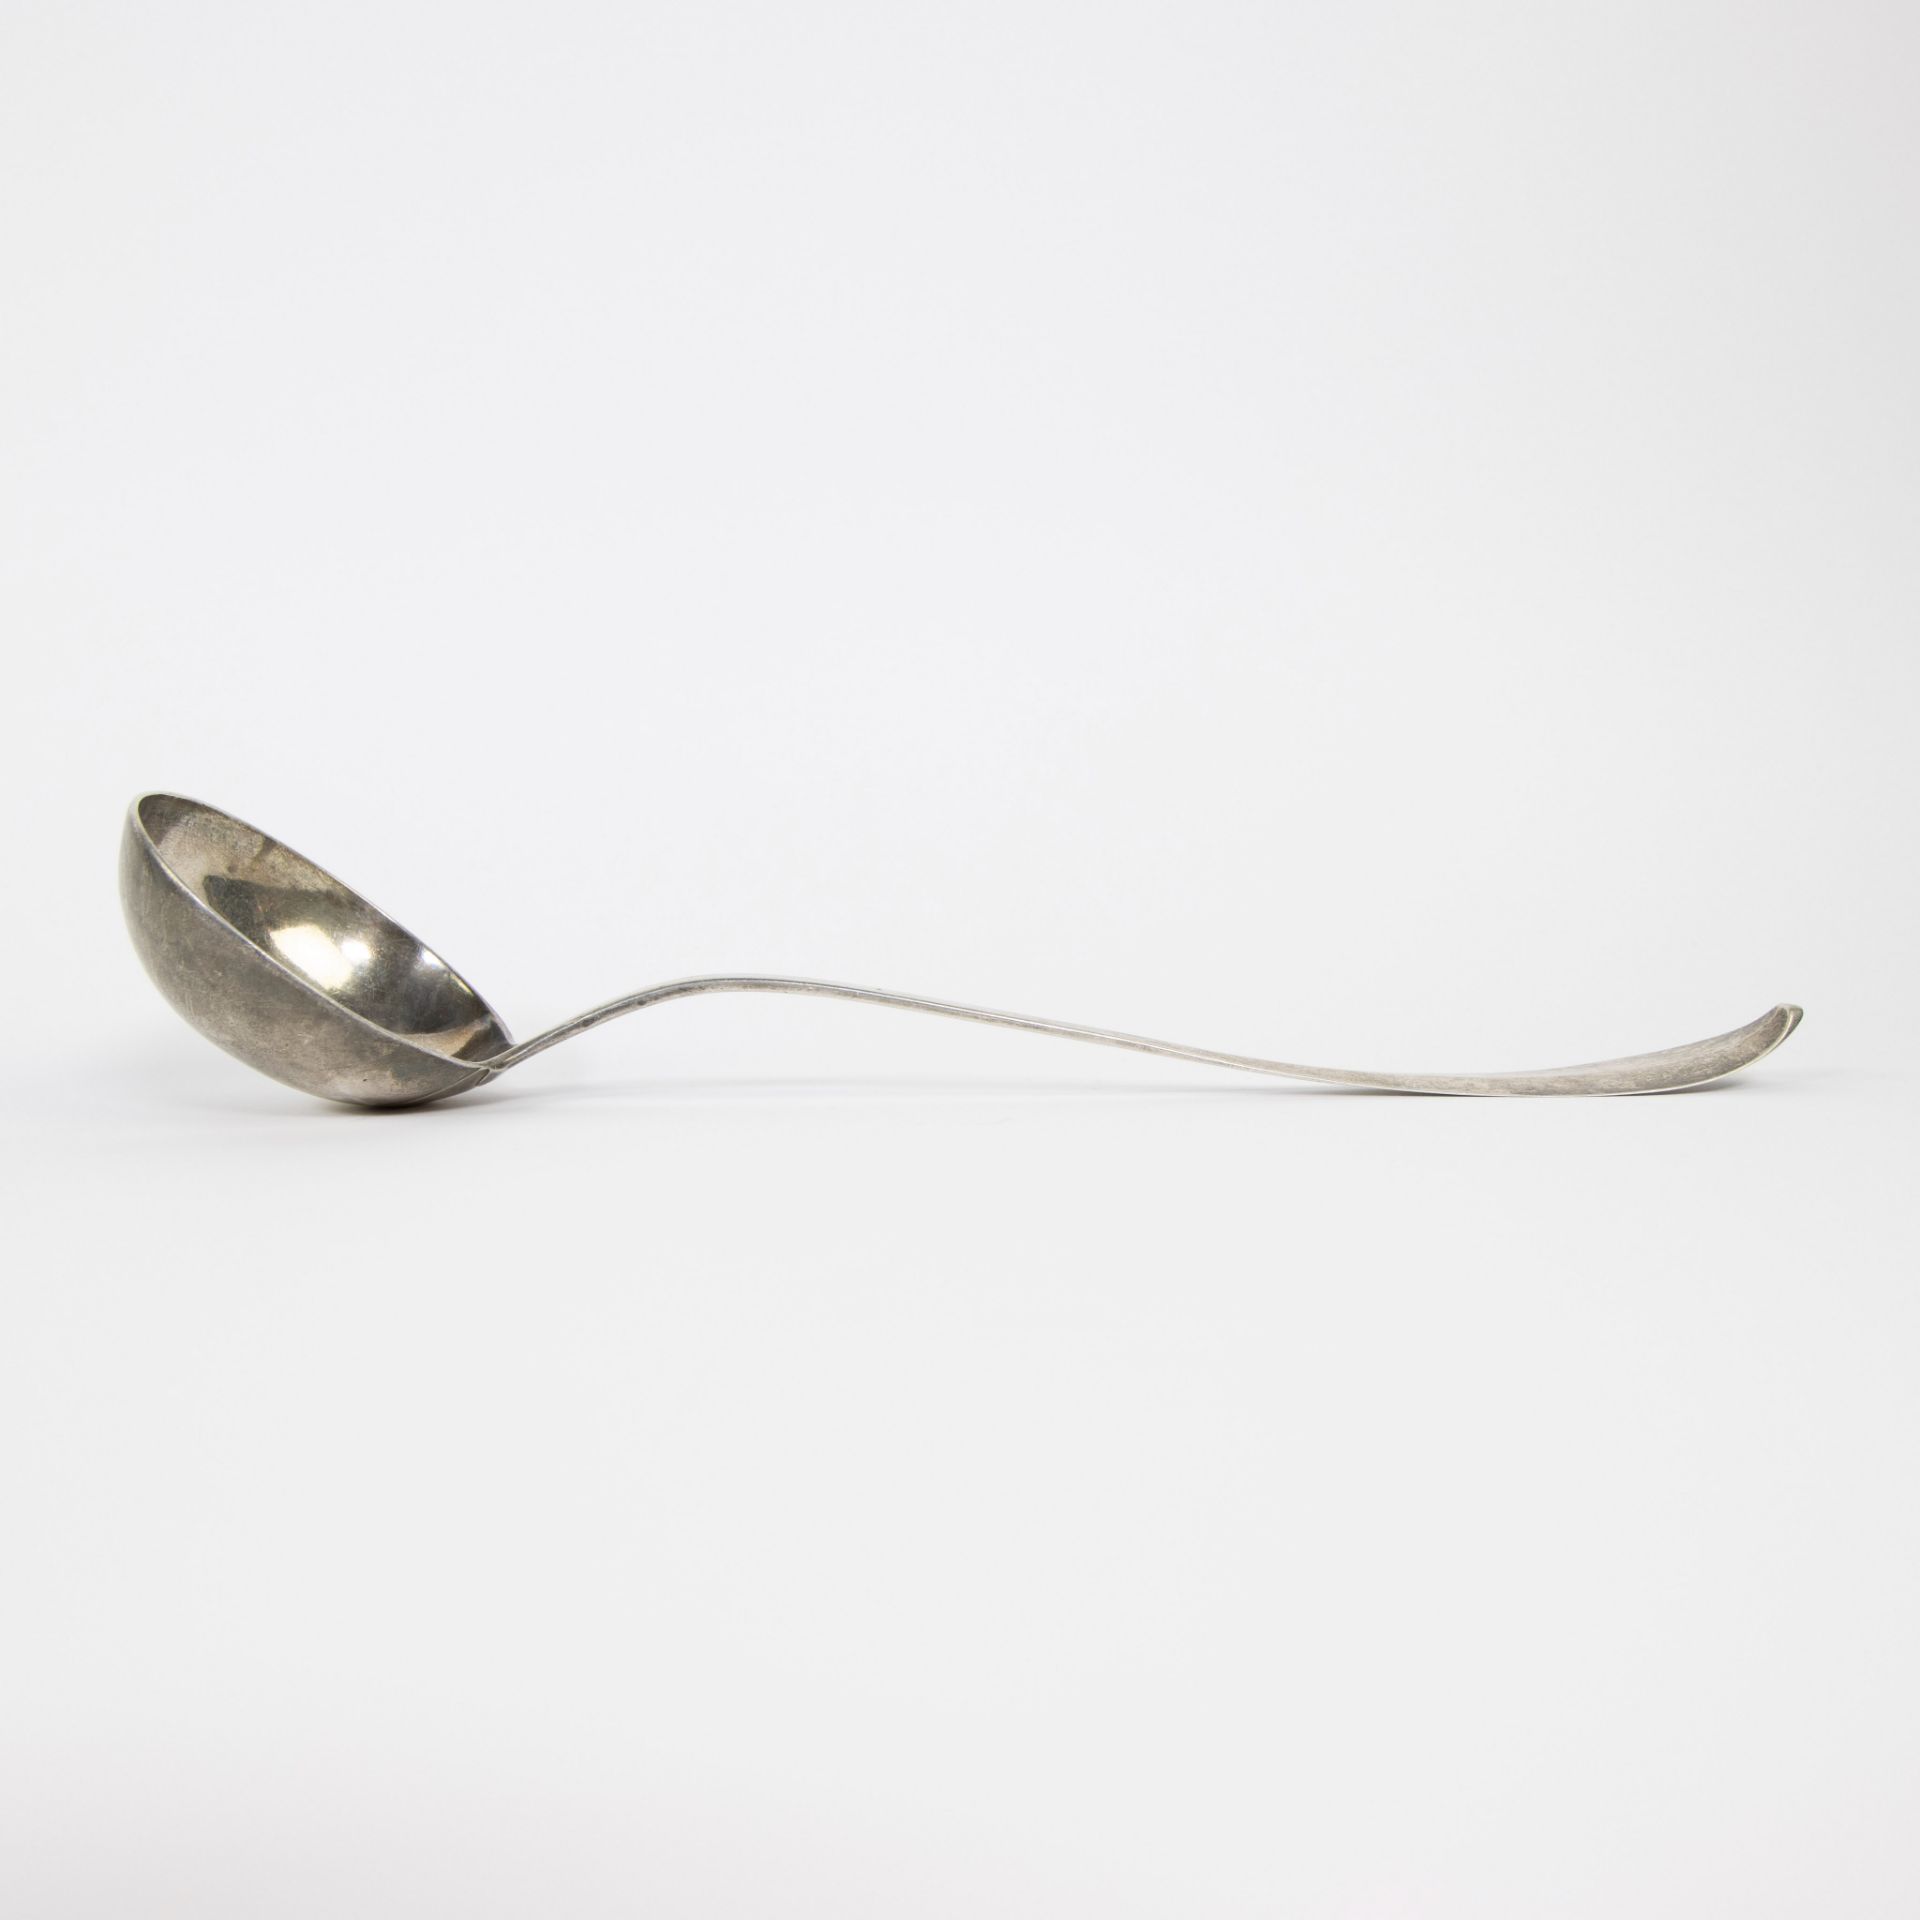 Silver soup spoon, Ghent 1790, Pieter Collé - Image 5 of 5